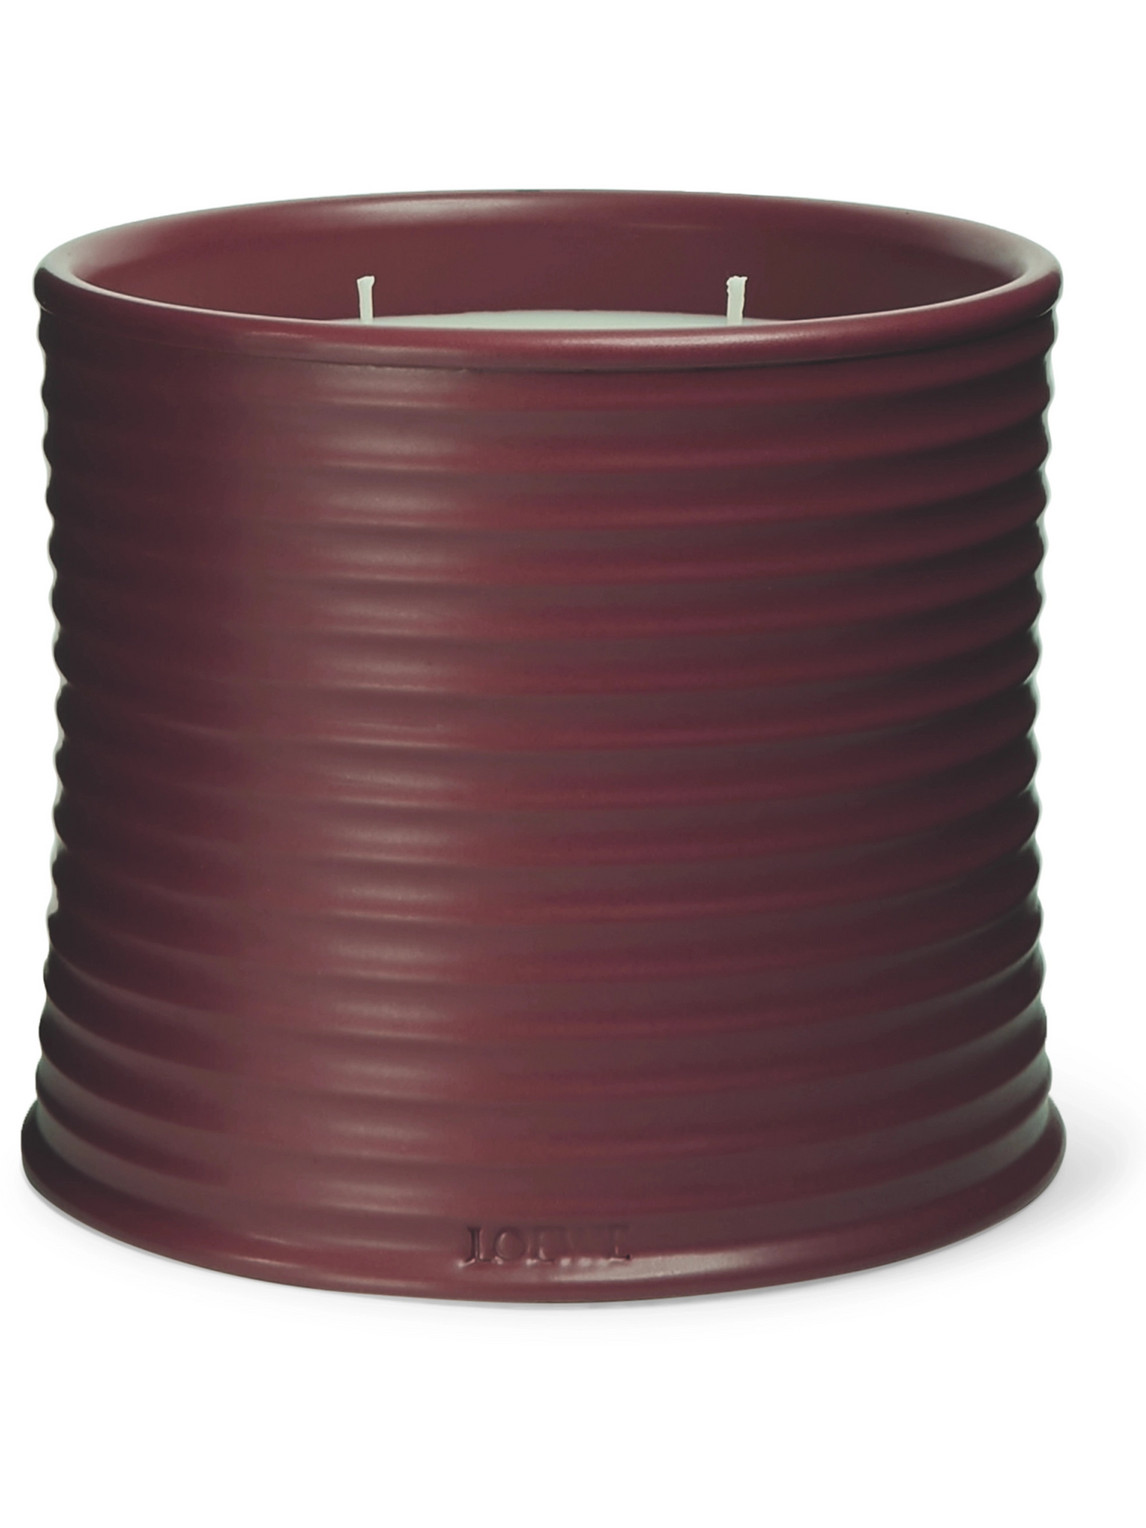 Loewe Home Scents Beetroot Scented Candle, 2120g In Colorless